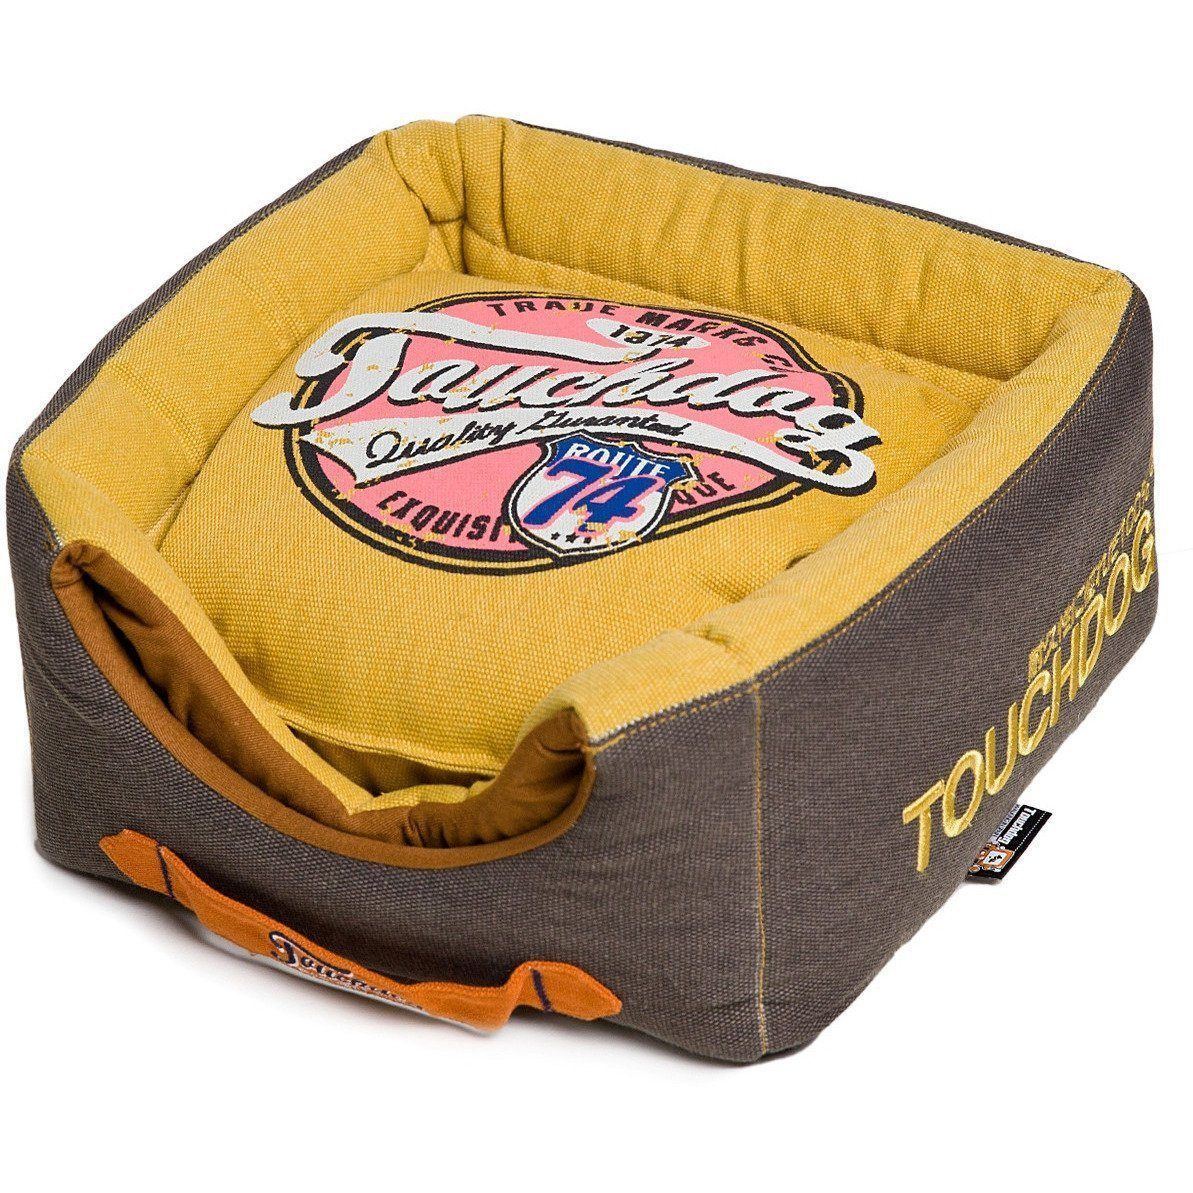 Touchdog ® 'Vintage Squared' 2-in-1 Convertible and Collapsible Dog and Cat Bed Mustard Yellow, Dark Brown 